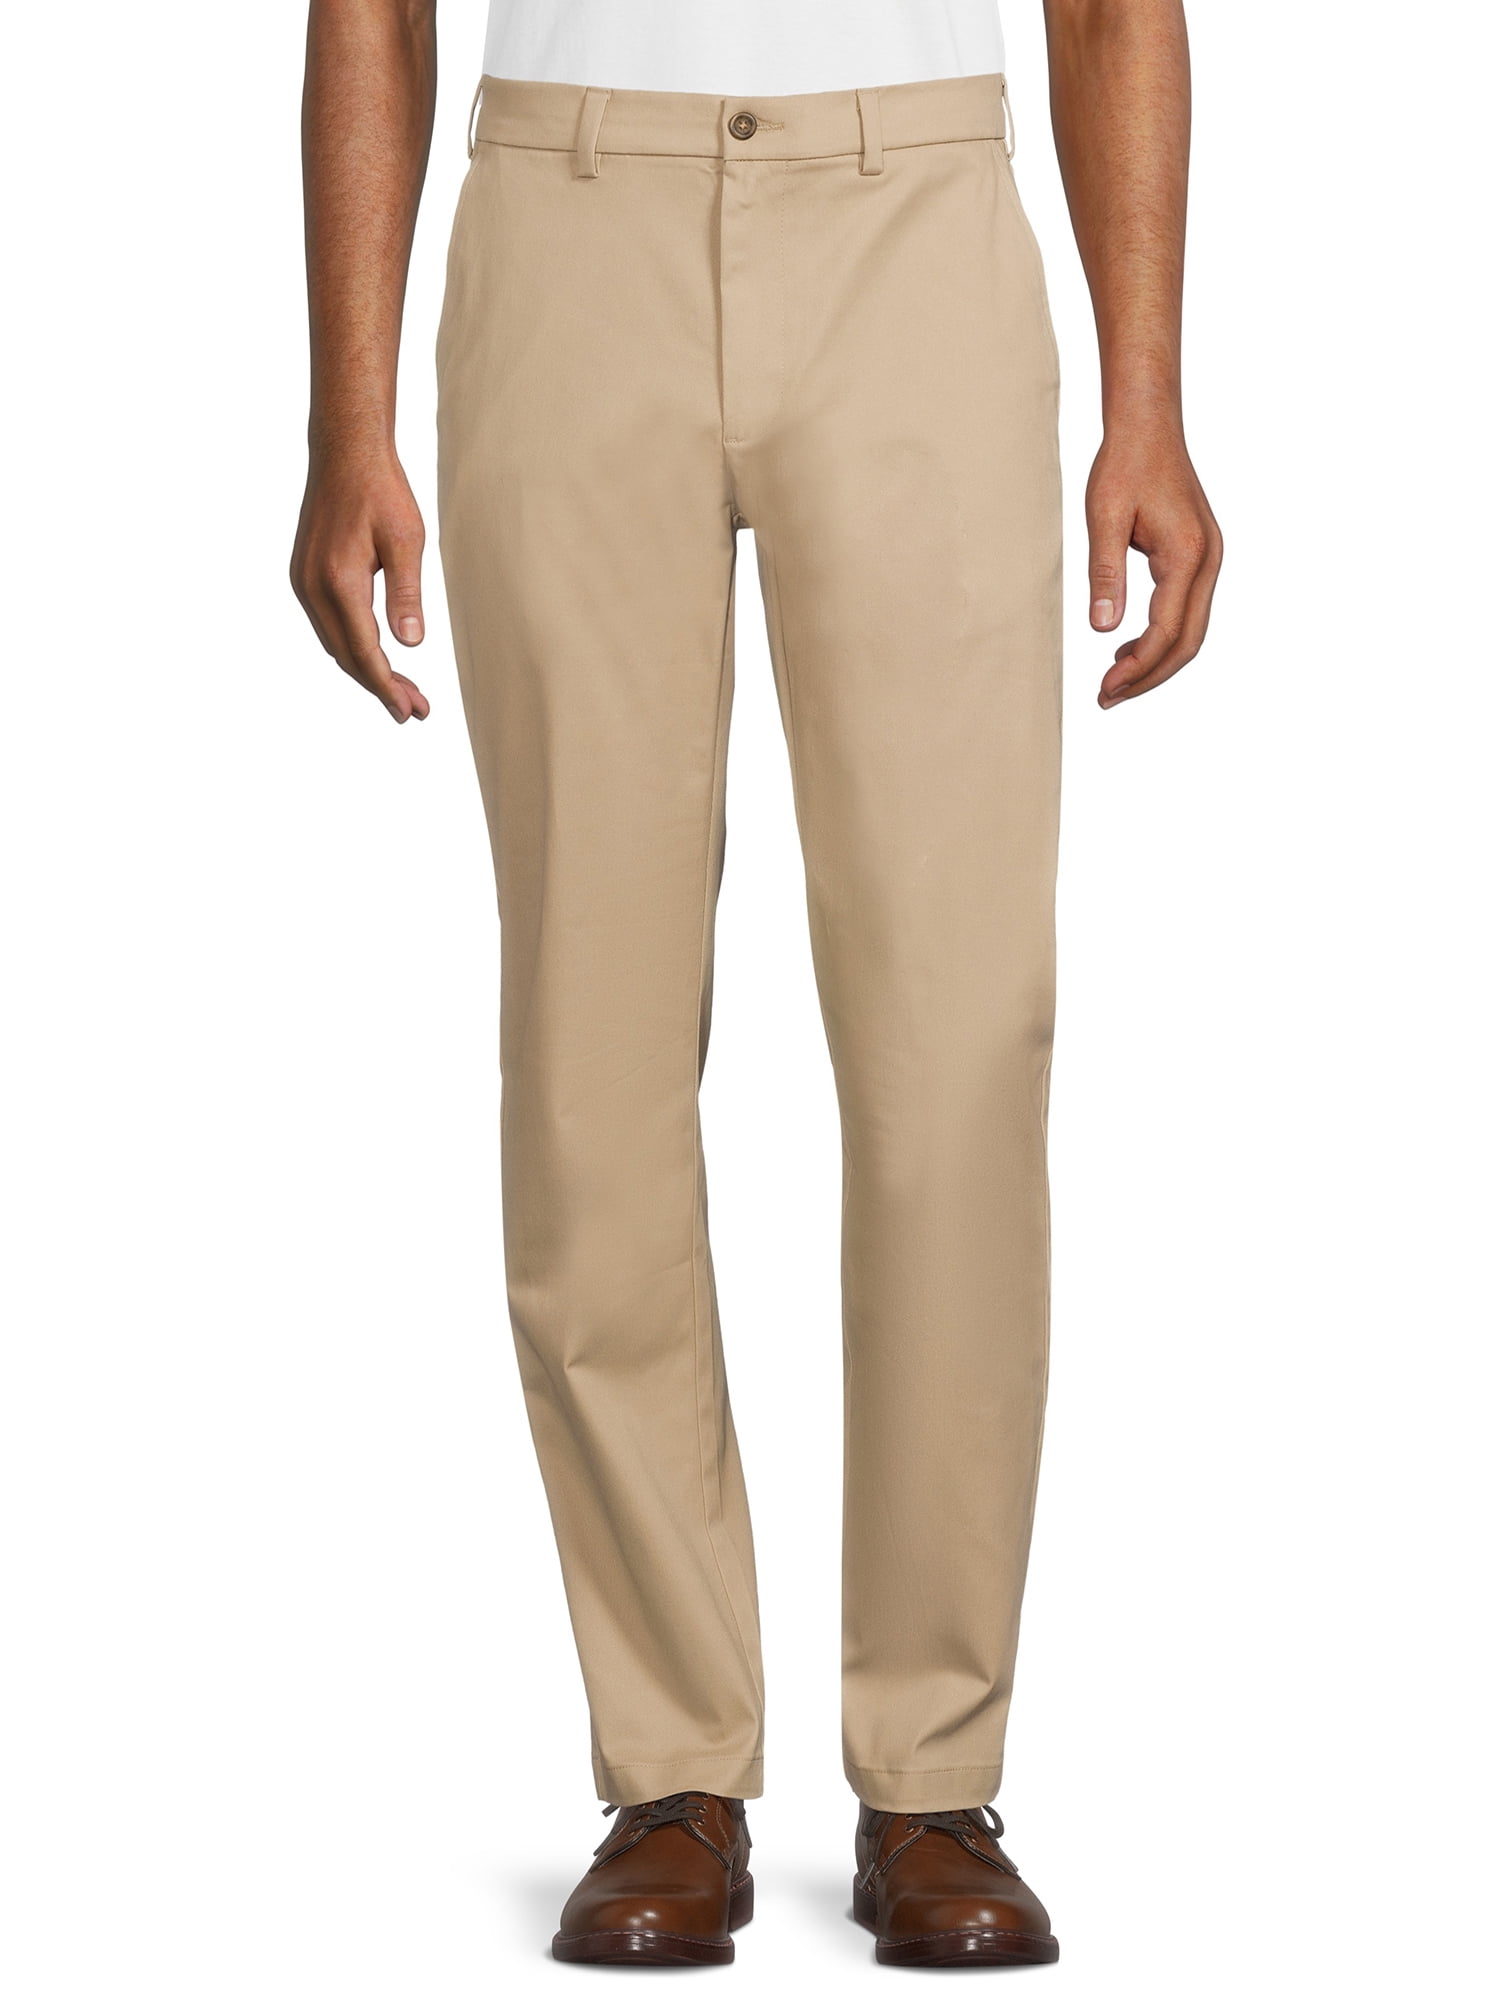 Essentials Men's Stain & Wrinkle Resistant Straight-fit Stretch Work Pant